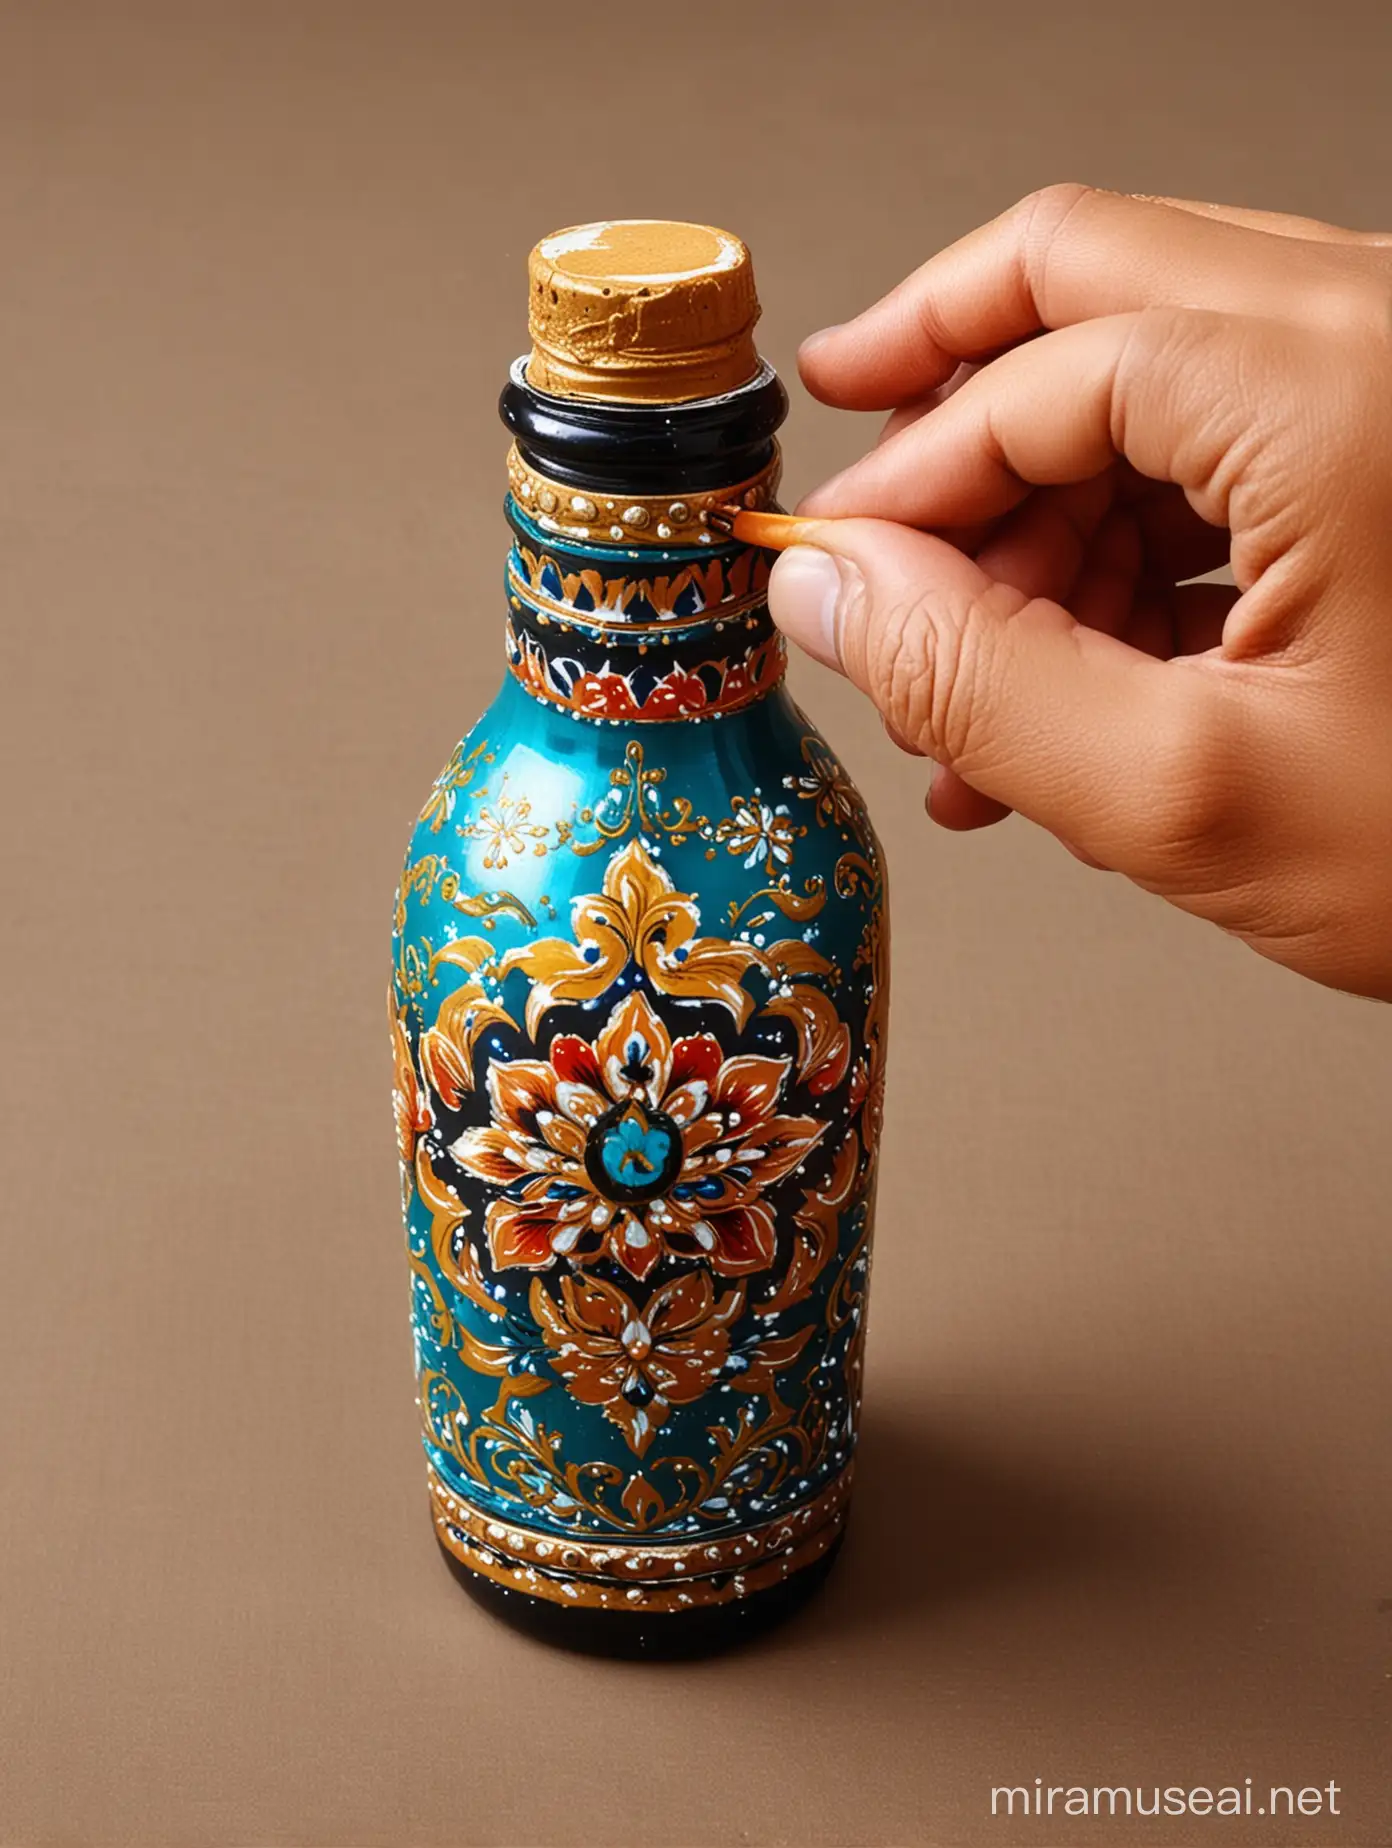 Artist Painting Intricate Mughal Design on Bottle with Acrylic Paints